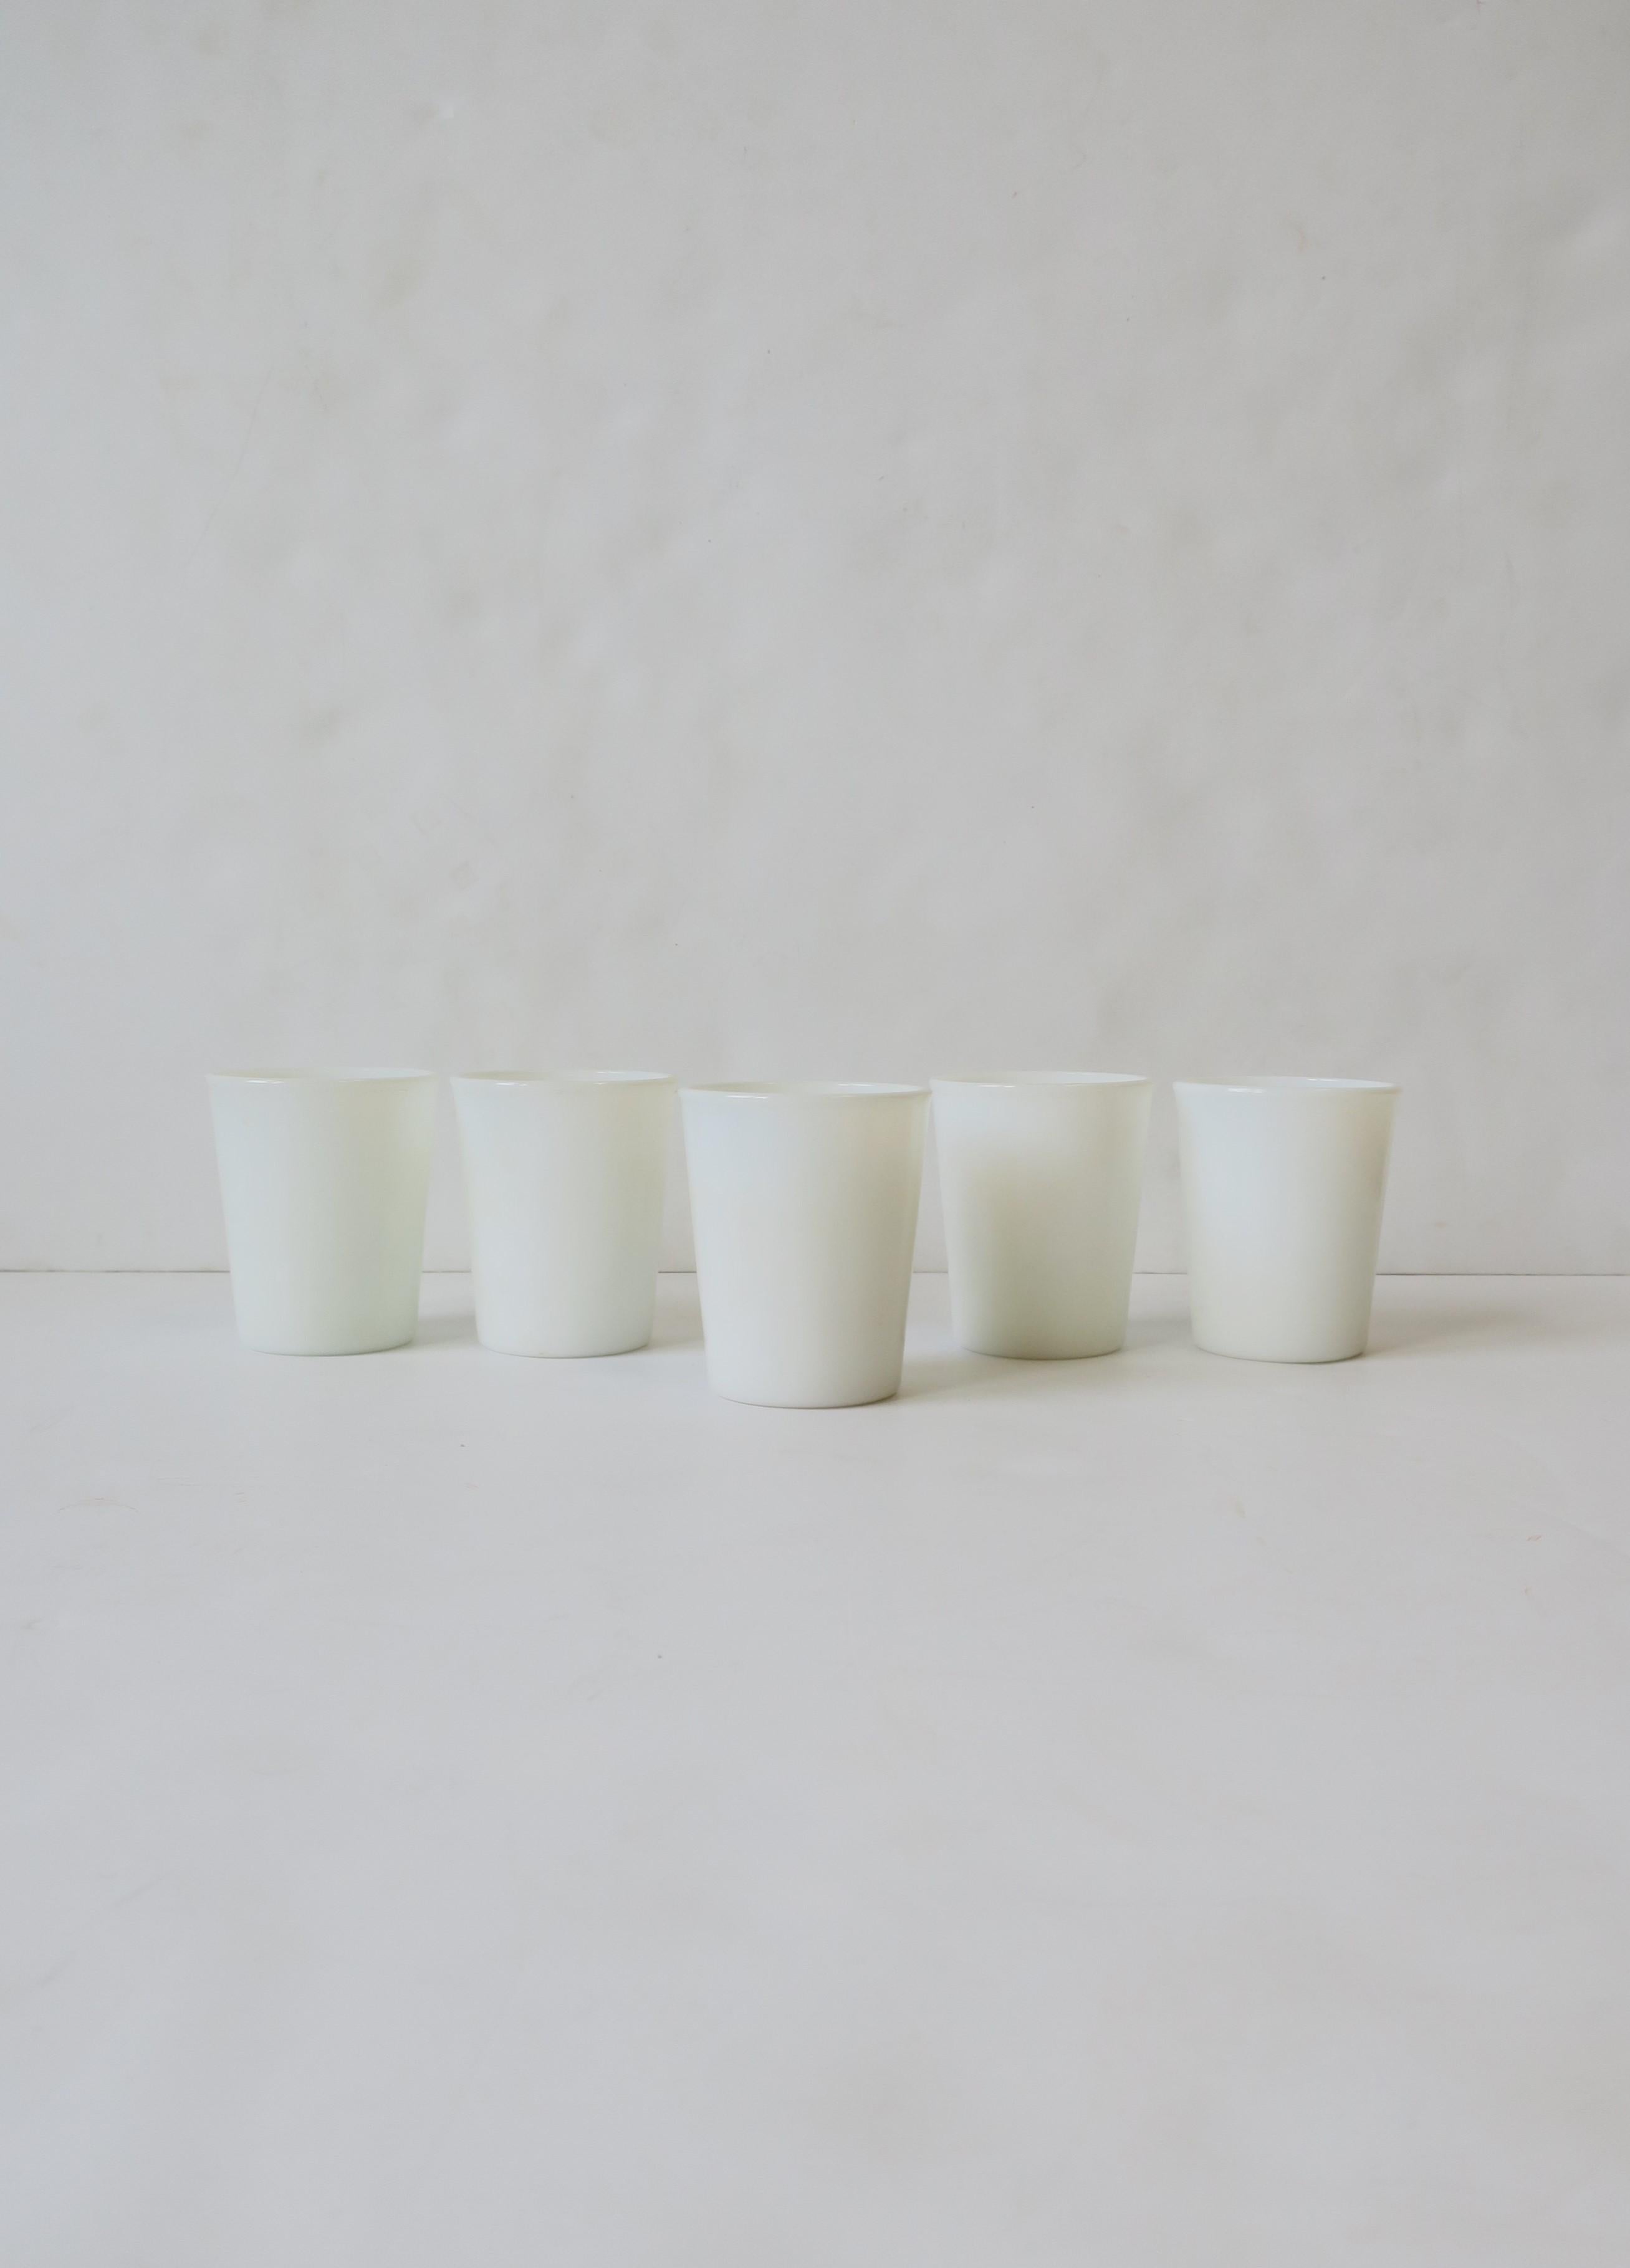 White Milk Glass Cocktail Tumbler Glasses, Set of 5, Early 20th Century 3